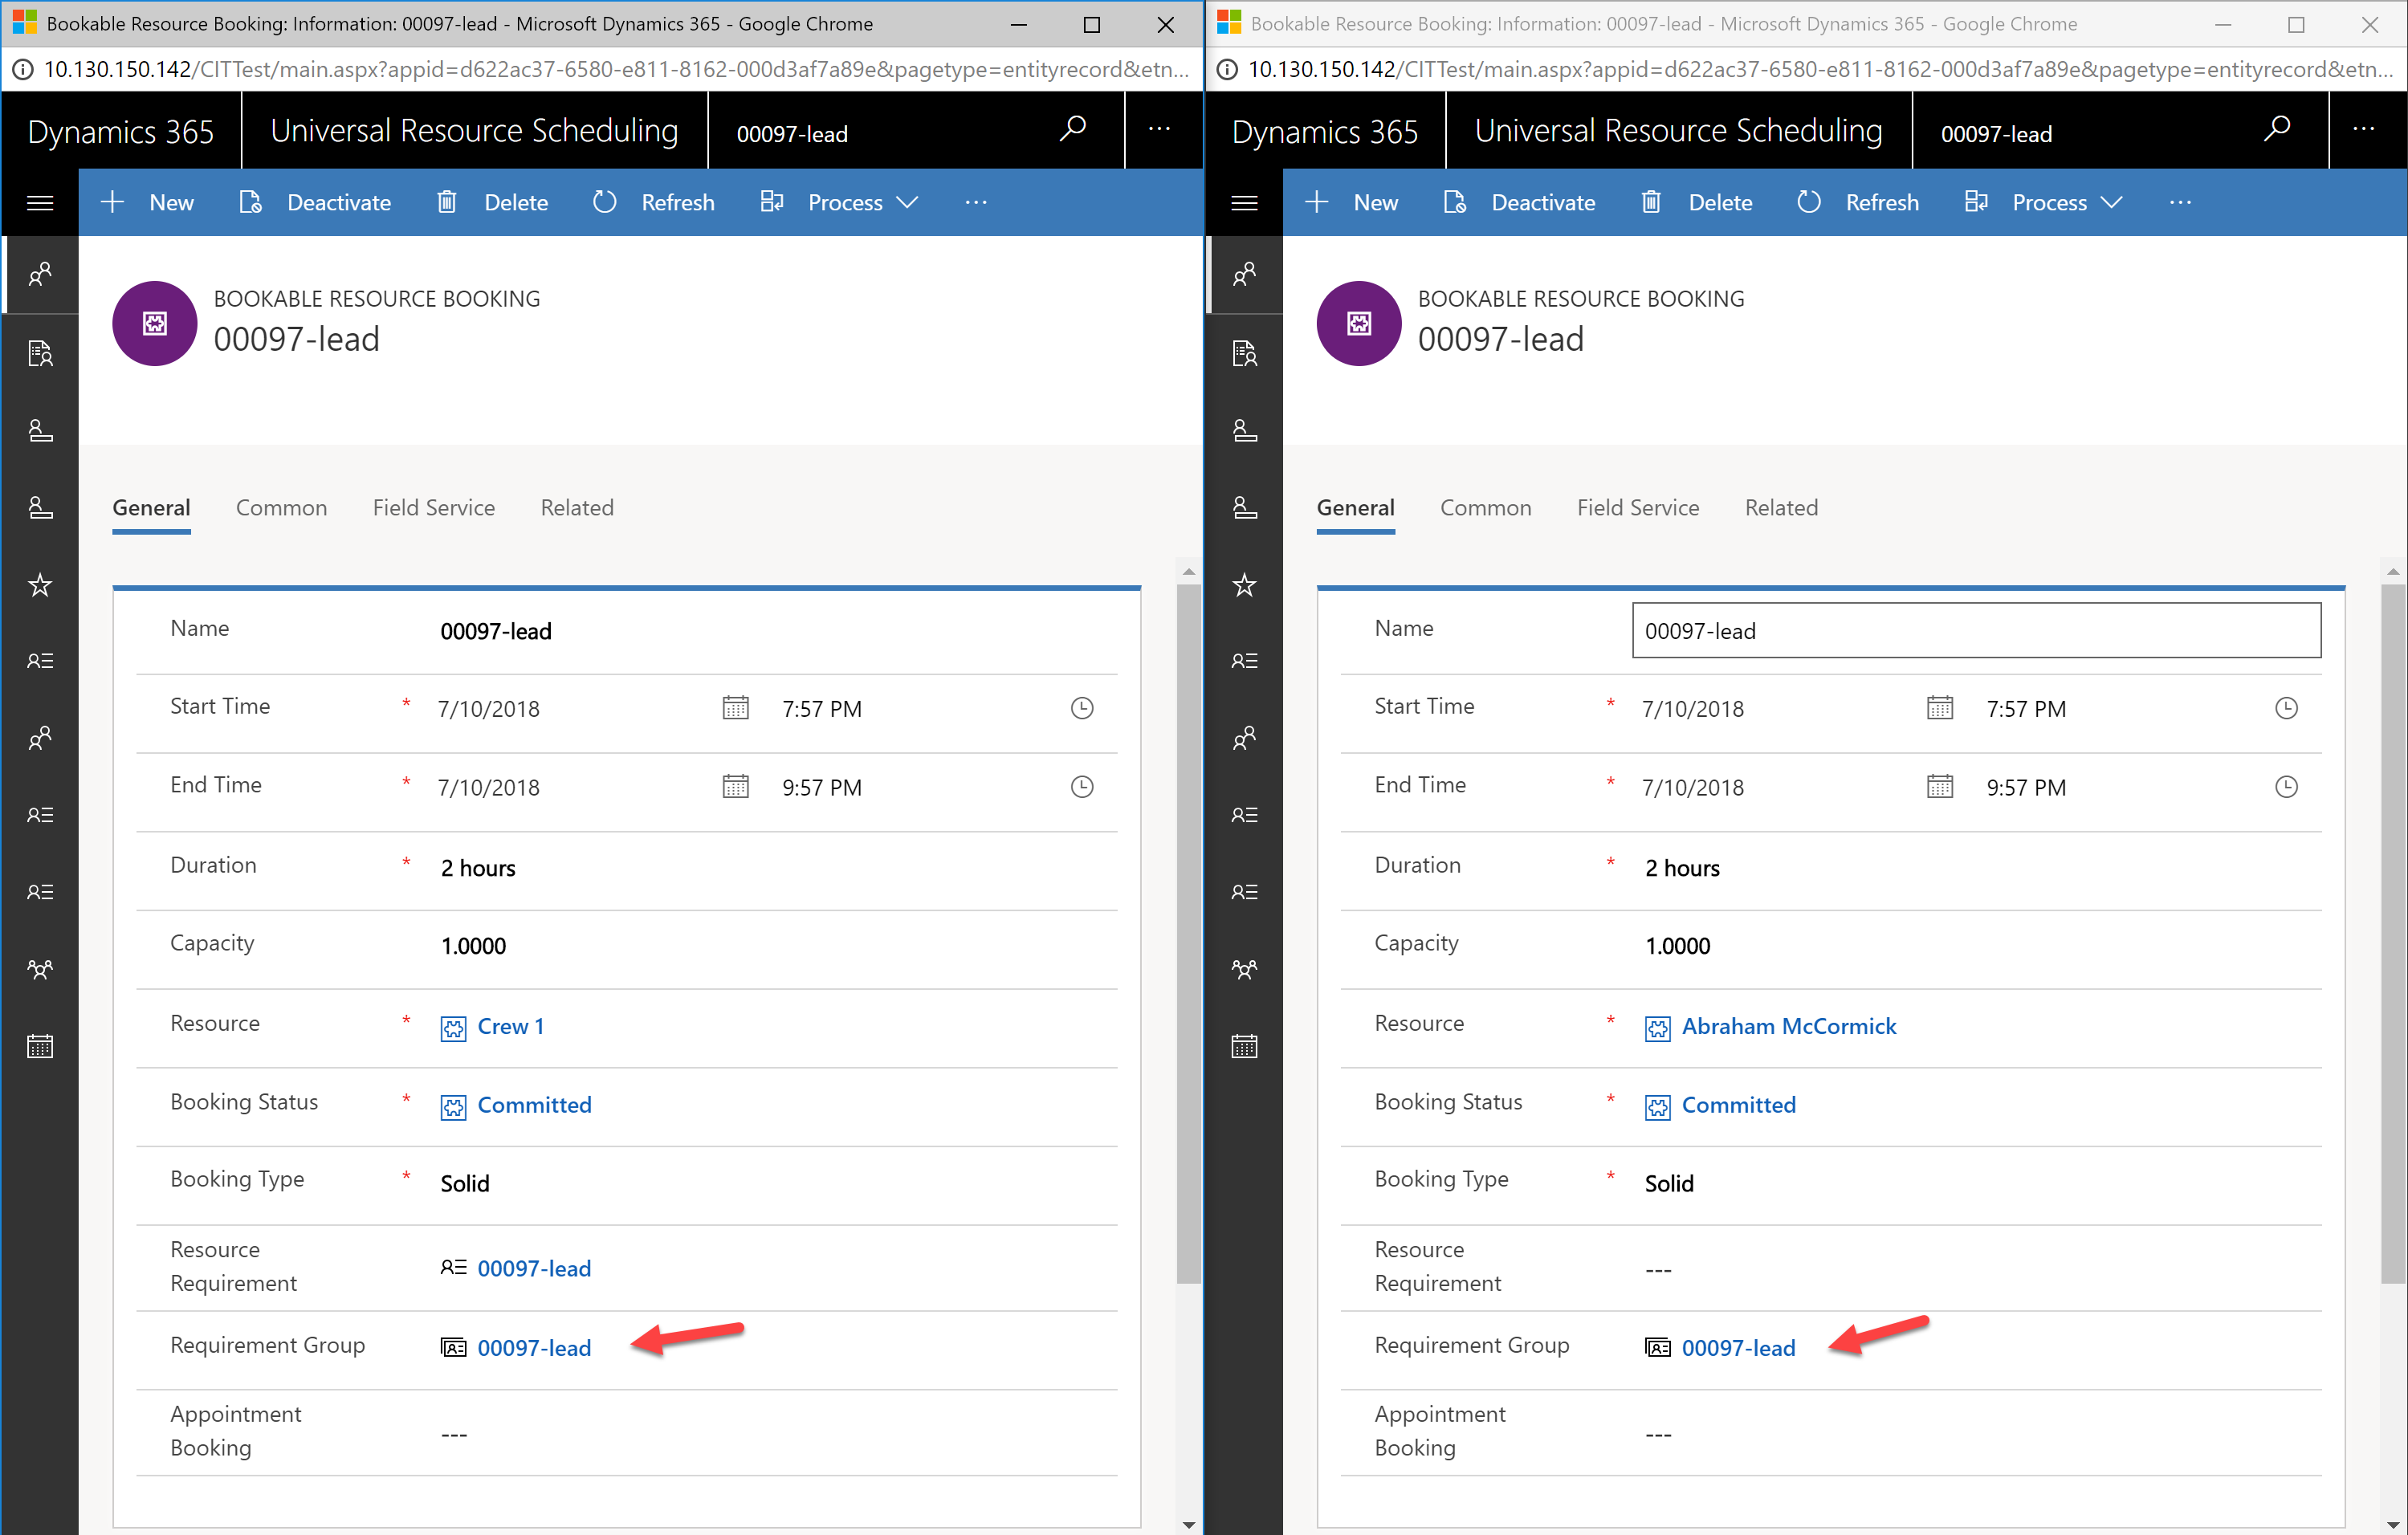 Screenshot showing both bookings related to a requirement group.